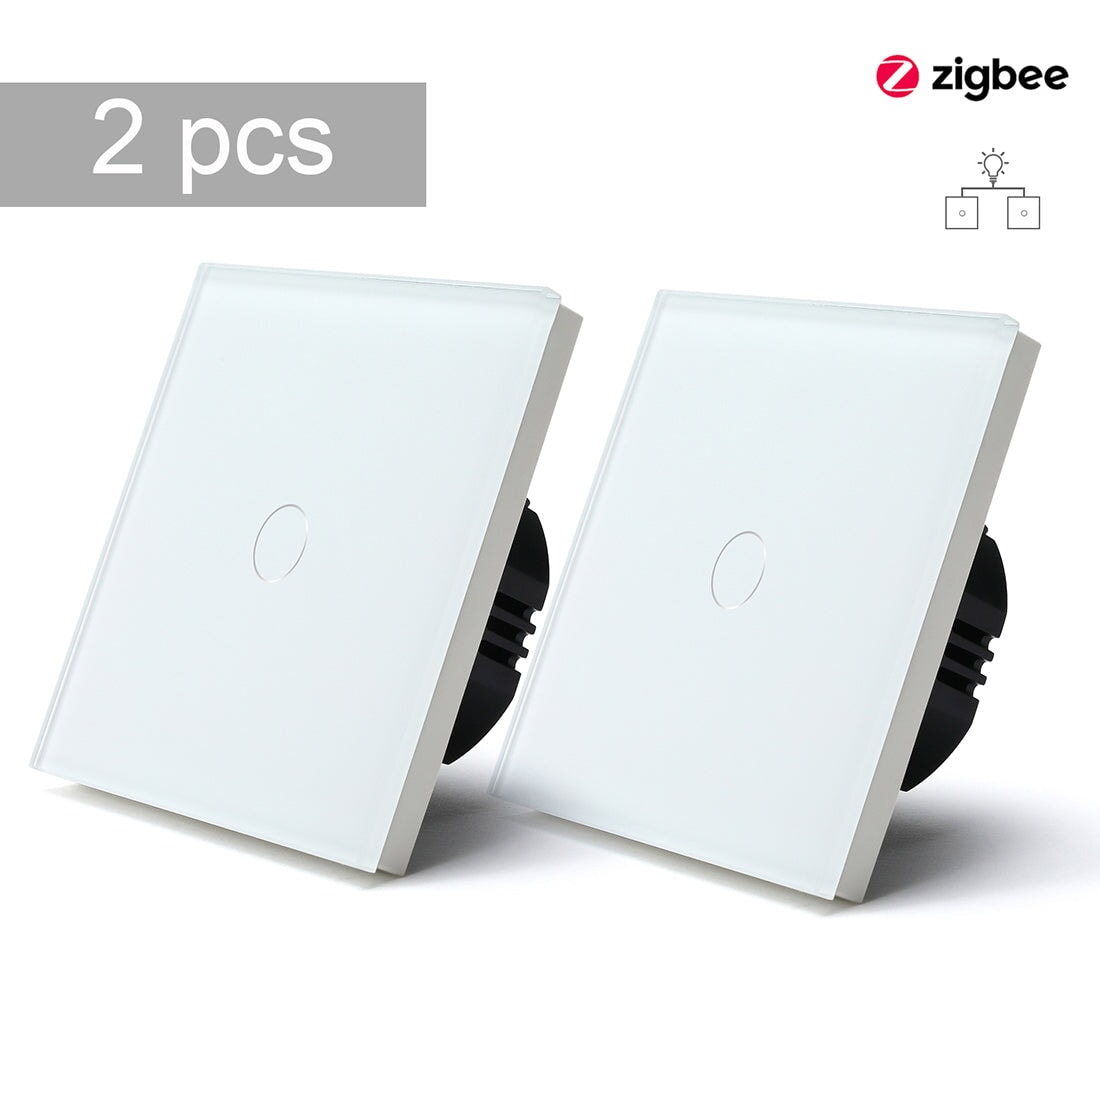 BSEED Zigbee Single Live Line Switch 1/2/3 Gang 1/2/3 Way Wall Smart Light Switch Single Live Line 1/2/3 pack Light Switches Bseedswitch White 1Gang 2 Pcs/Pack